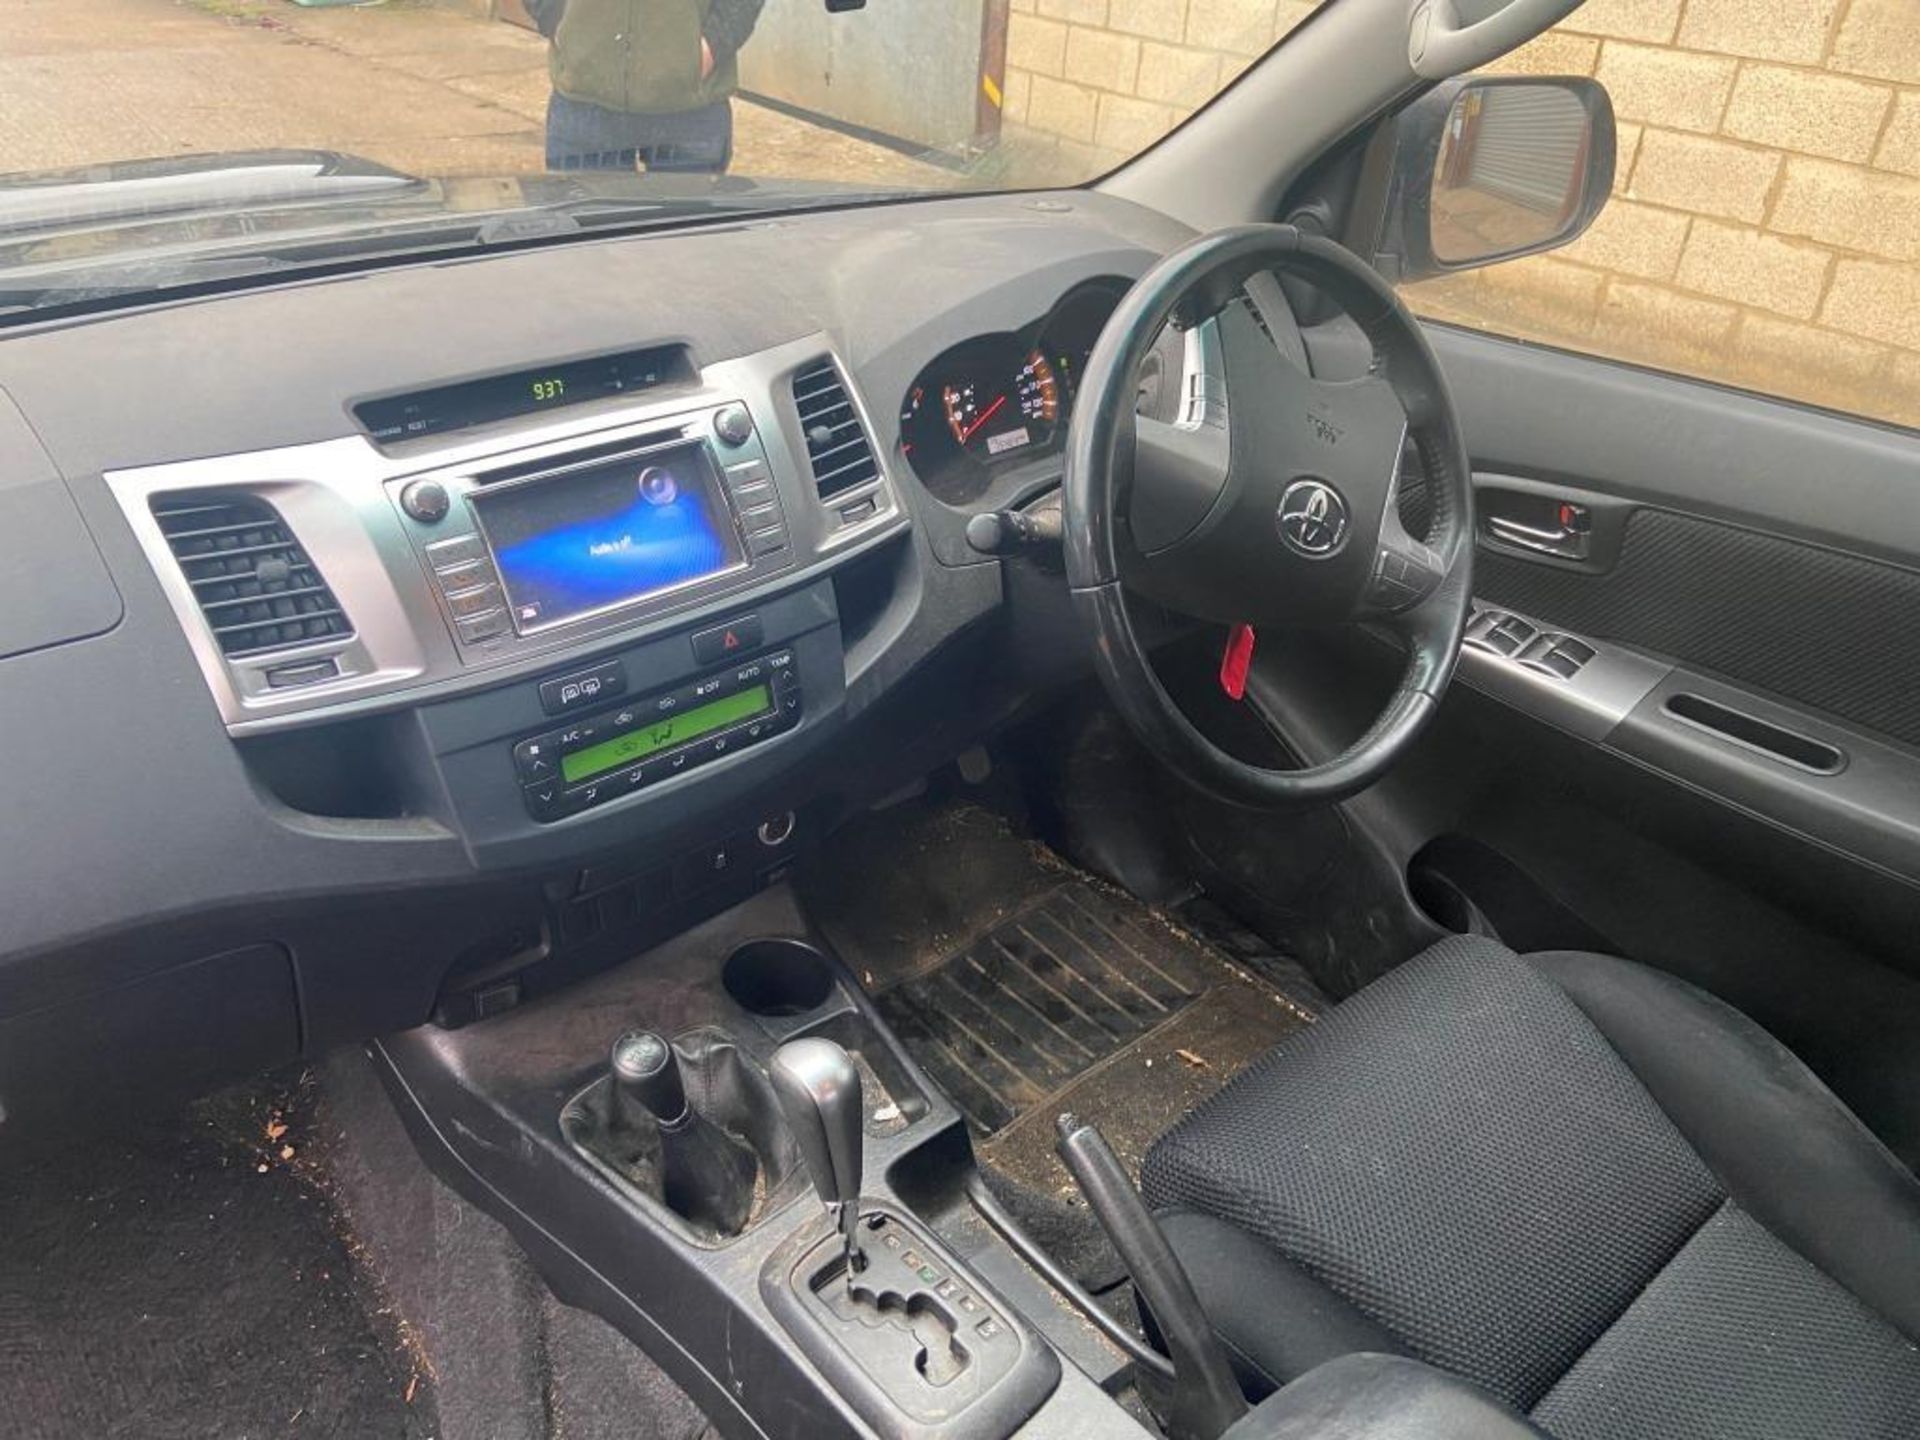 Toyota Hilux Invincible automatic, sat nav, double cab pickup (2015) - Image 20 of 37